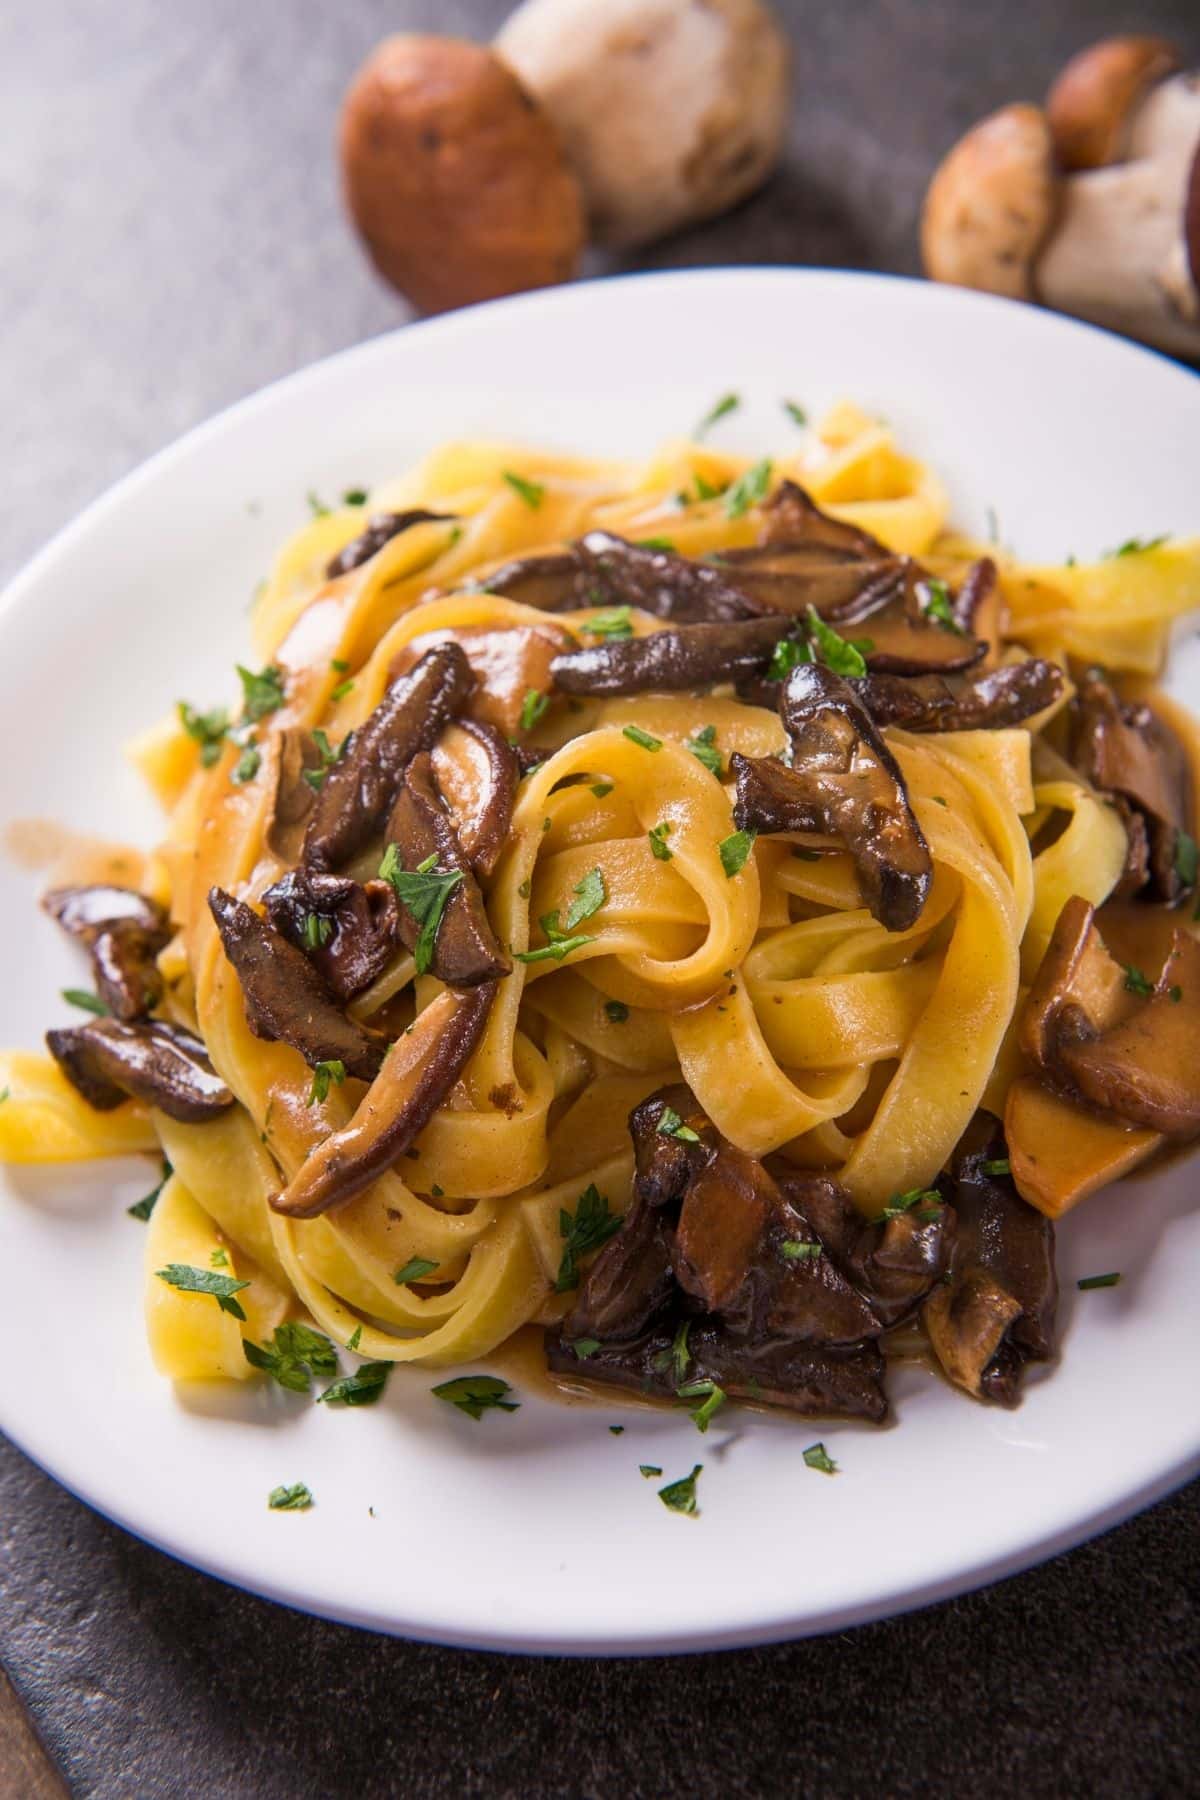 A bowl of pasta with mushrooms.